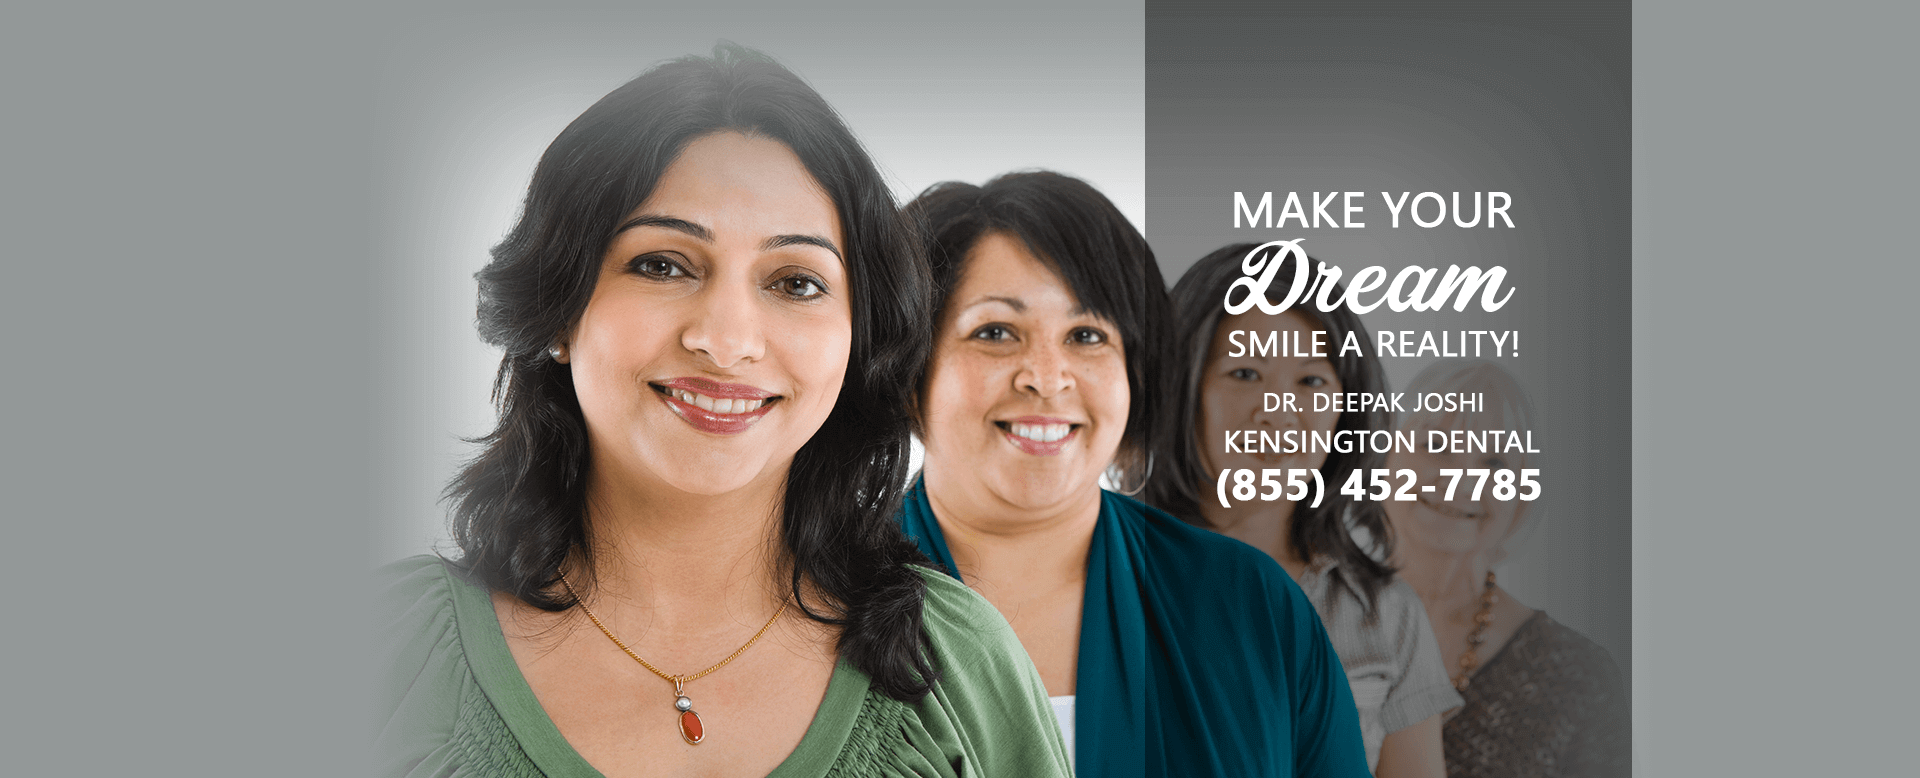 Happy family with oral health banner image at Kensington Dental with Dr. Deepak Joshi